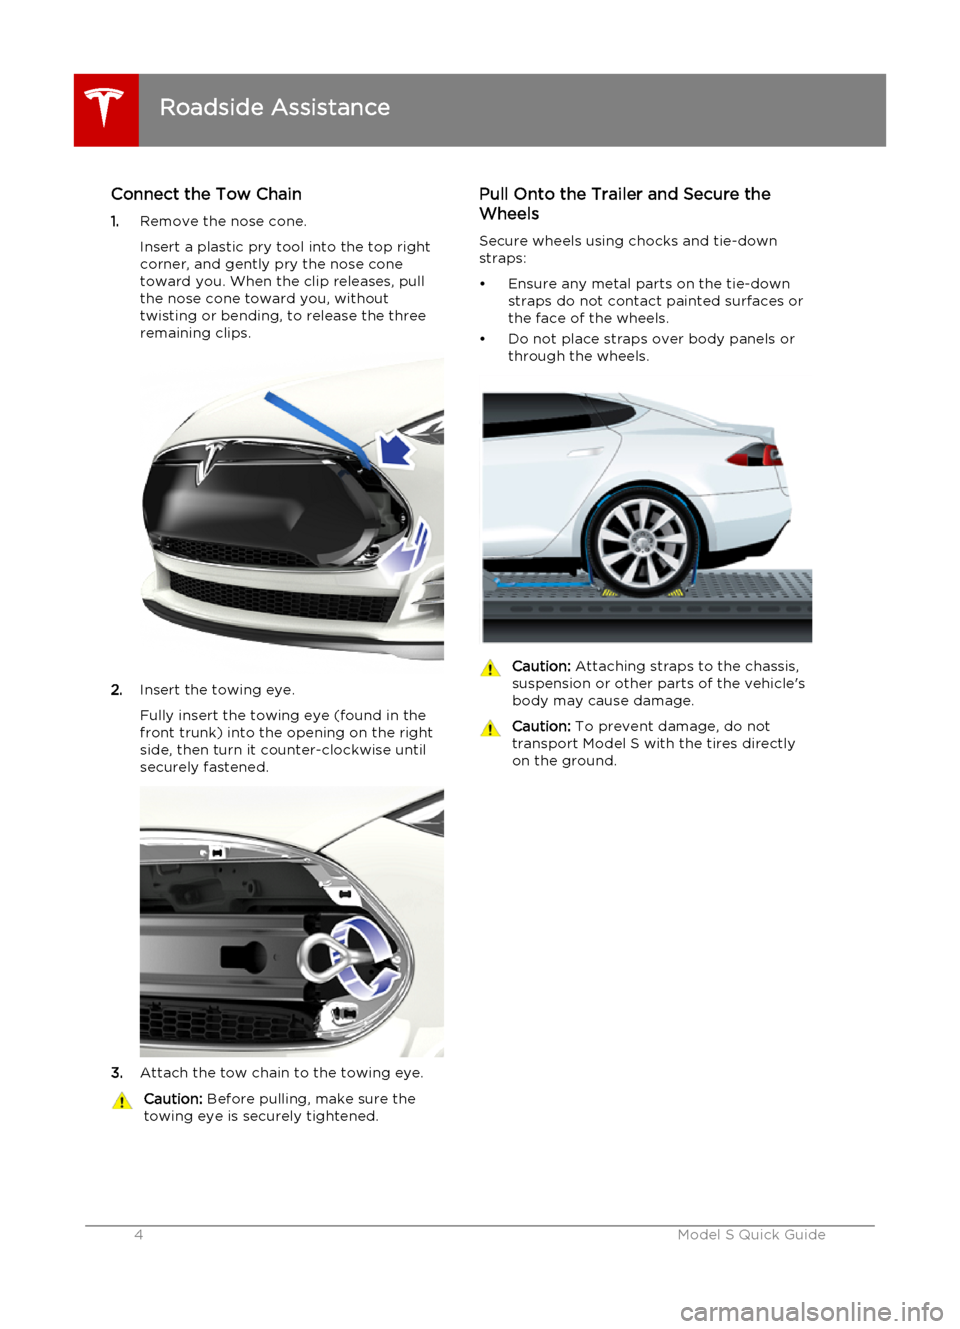 TESLA MODEL S 2015  クイックガイド (in Japanese) Connect the Tow Chain
1. Remove the nose cone.
Insert a plastic pry tool into the top right
corner, and gently pry the nose cone toward you. When the clip releases, pull
the nose cone toward you, with